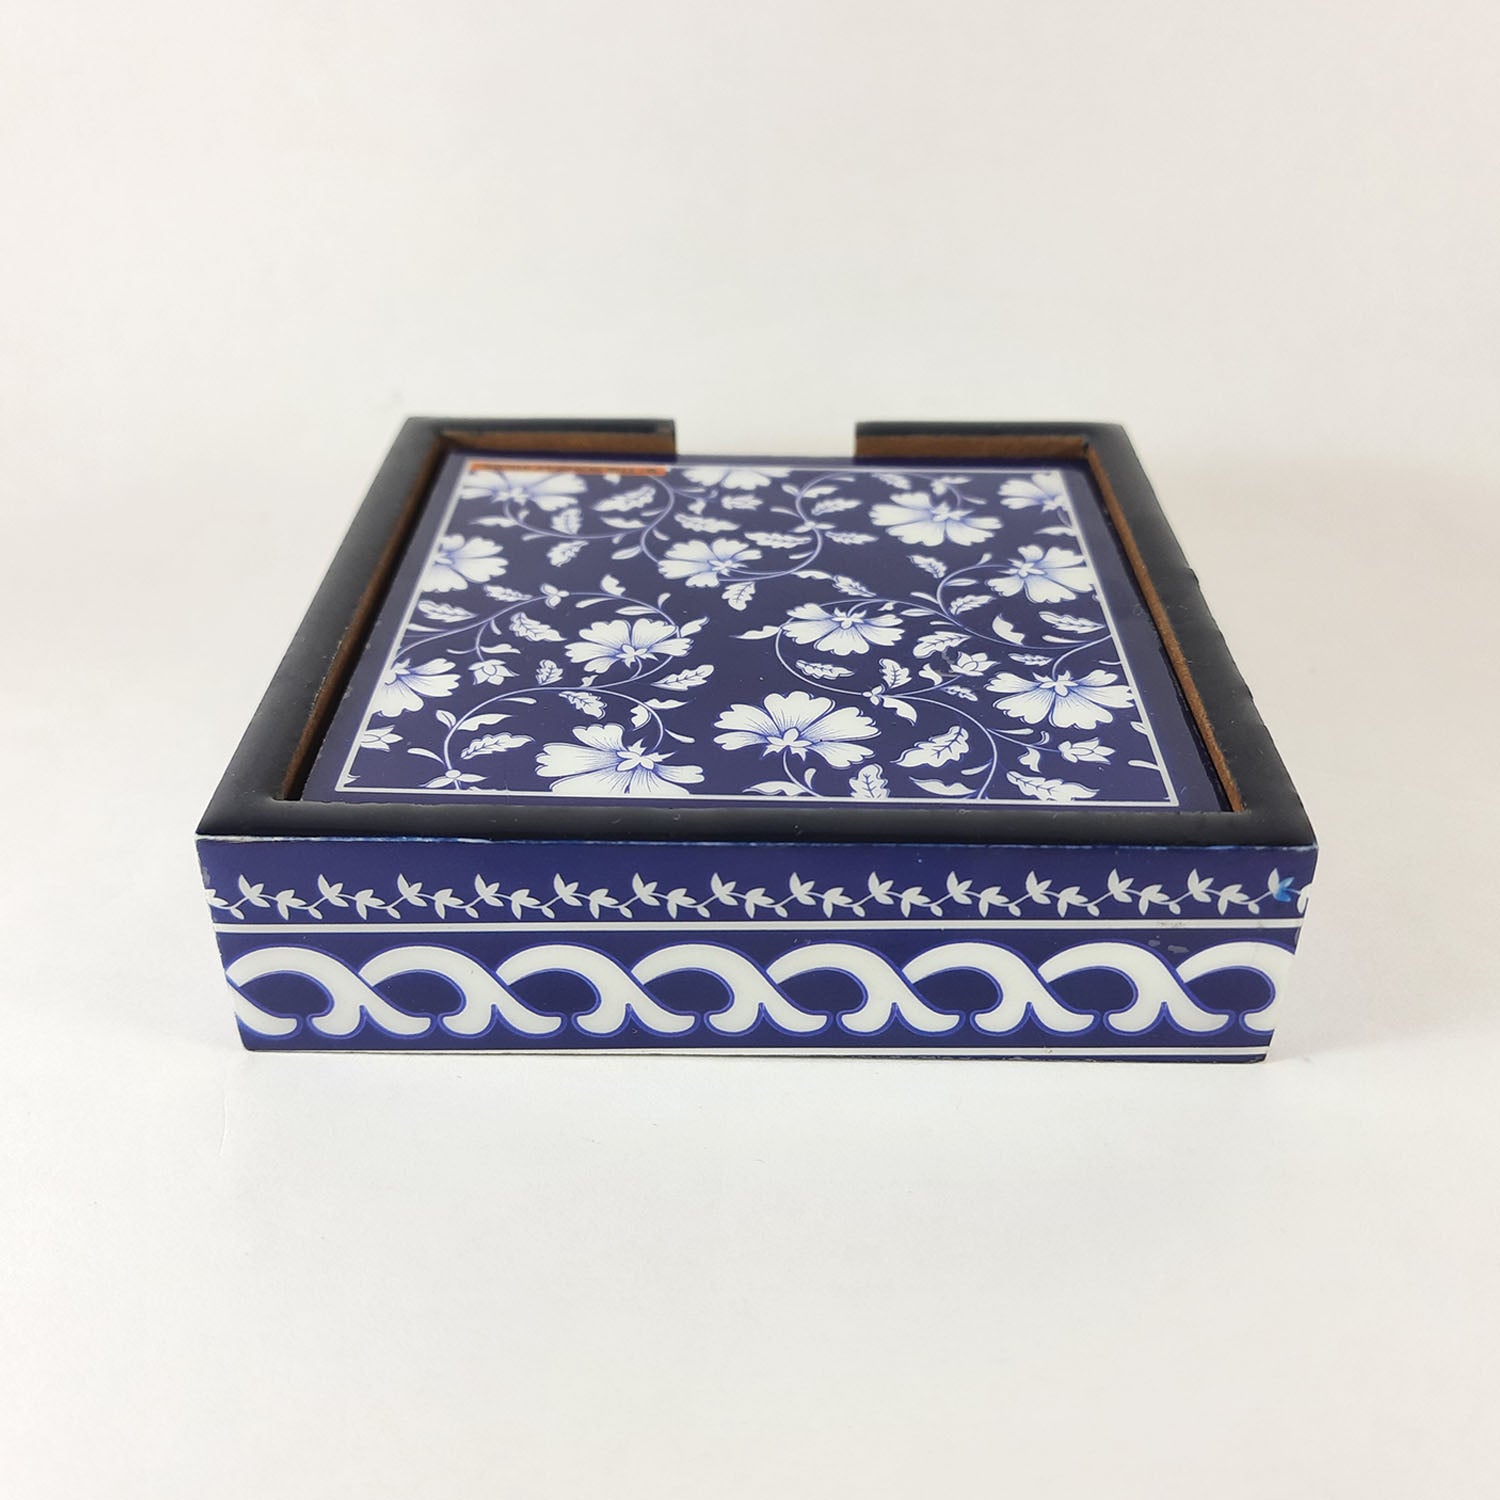 Set of 4 Blue Ceramic Pottery Coasters Made in India - Fleur